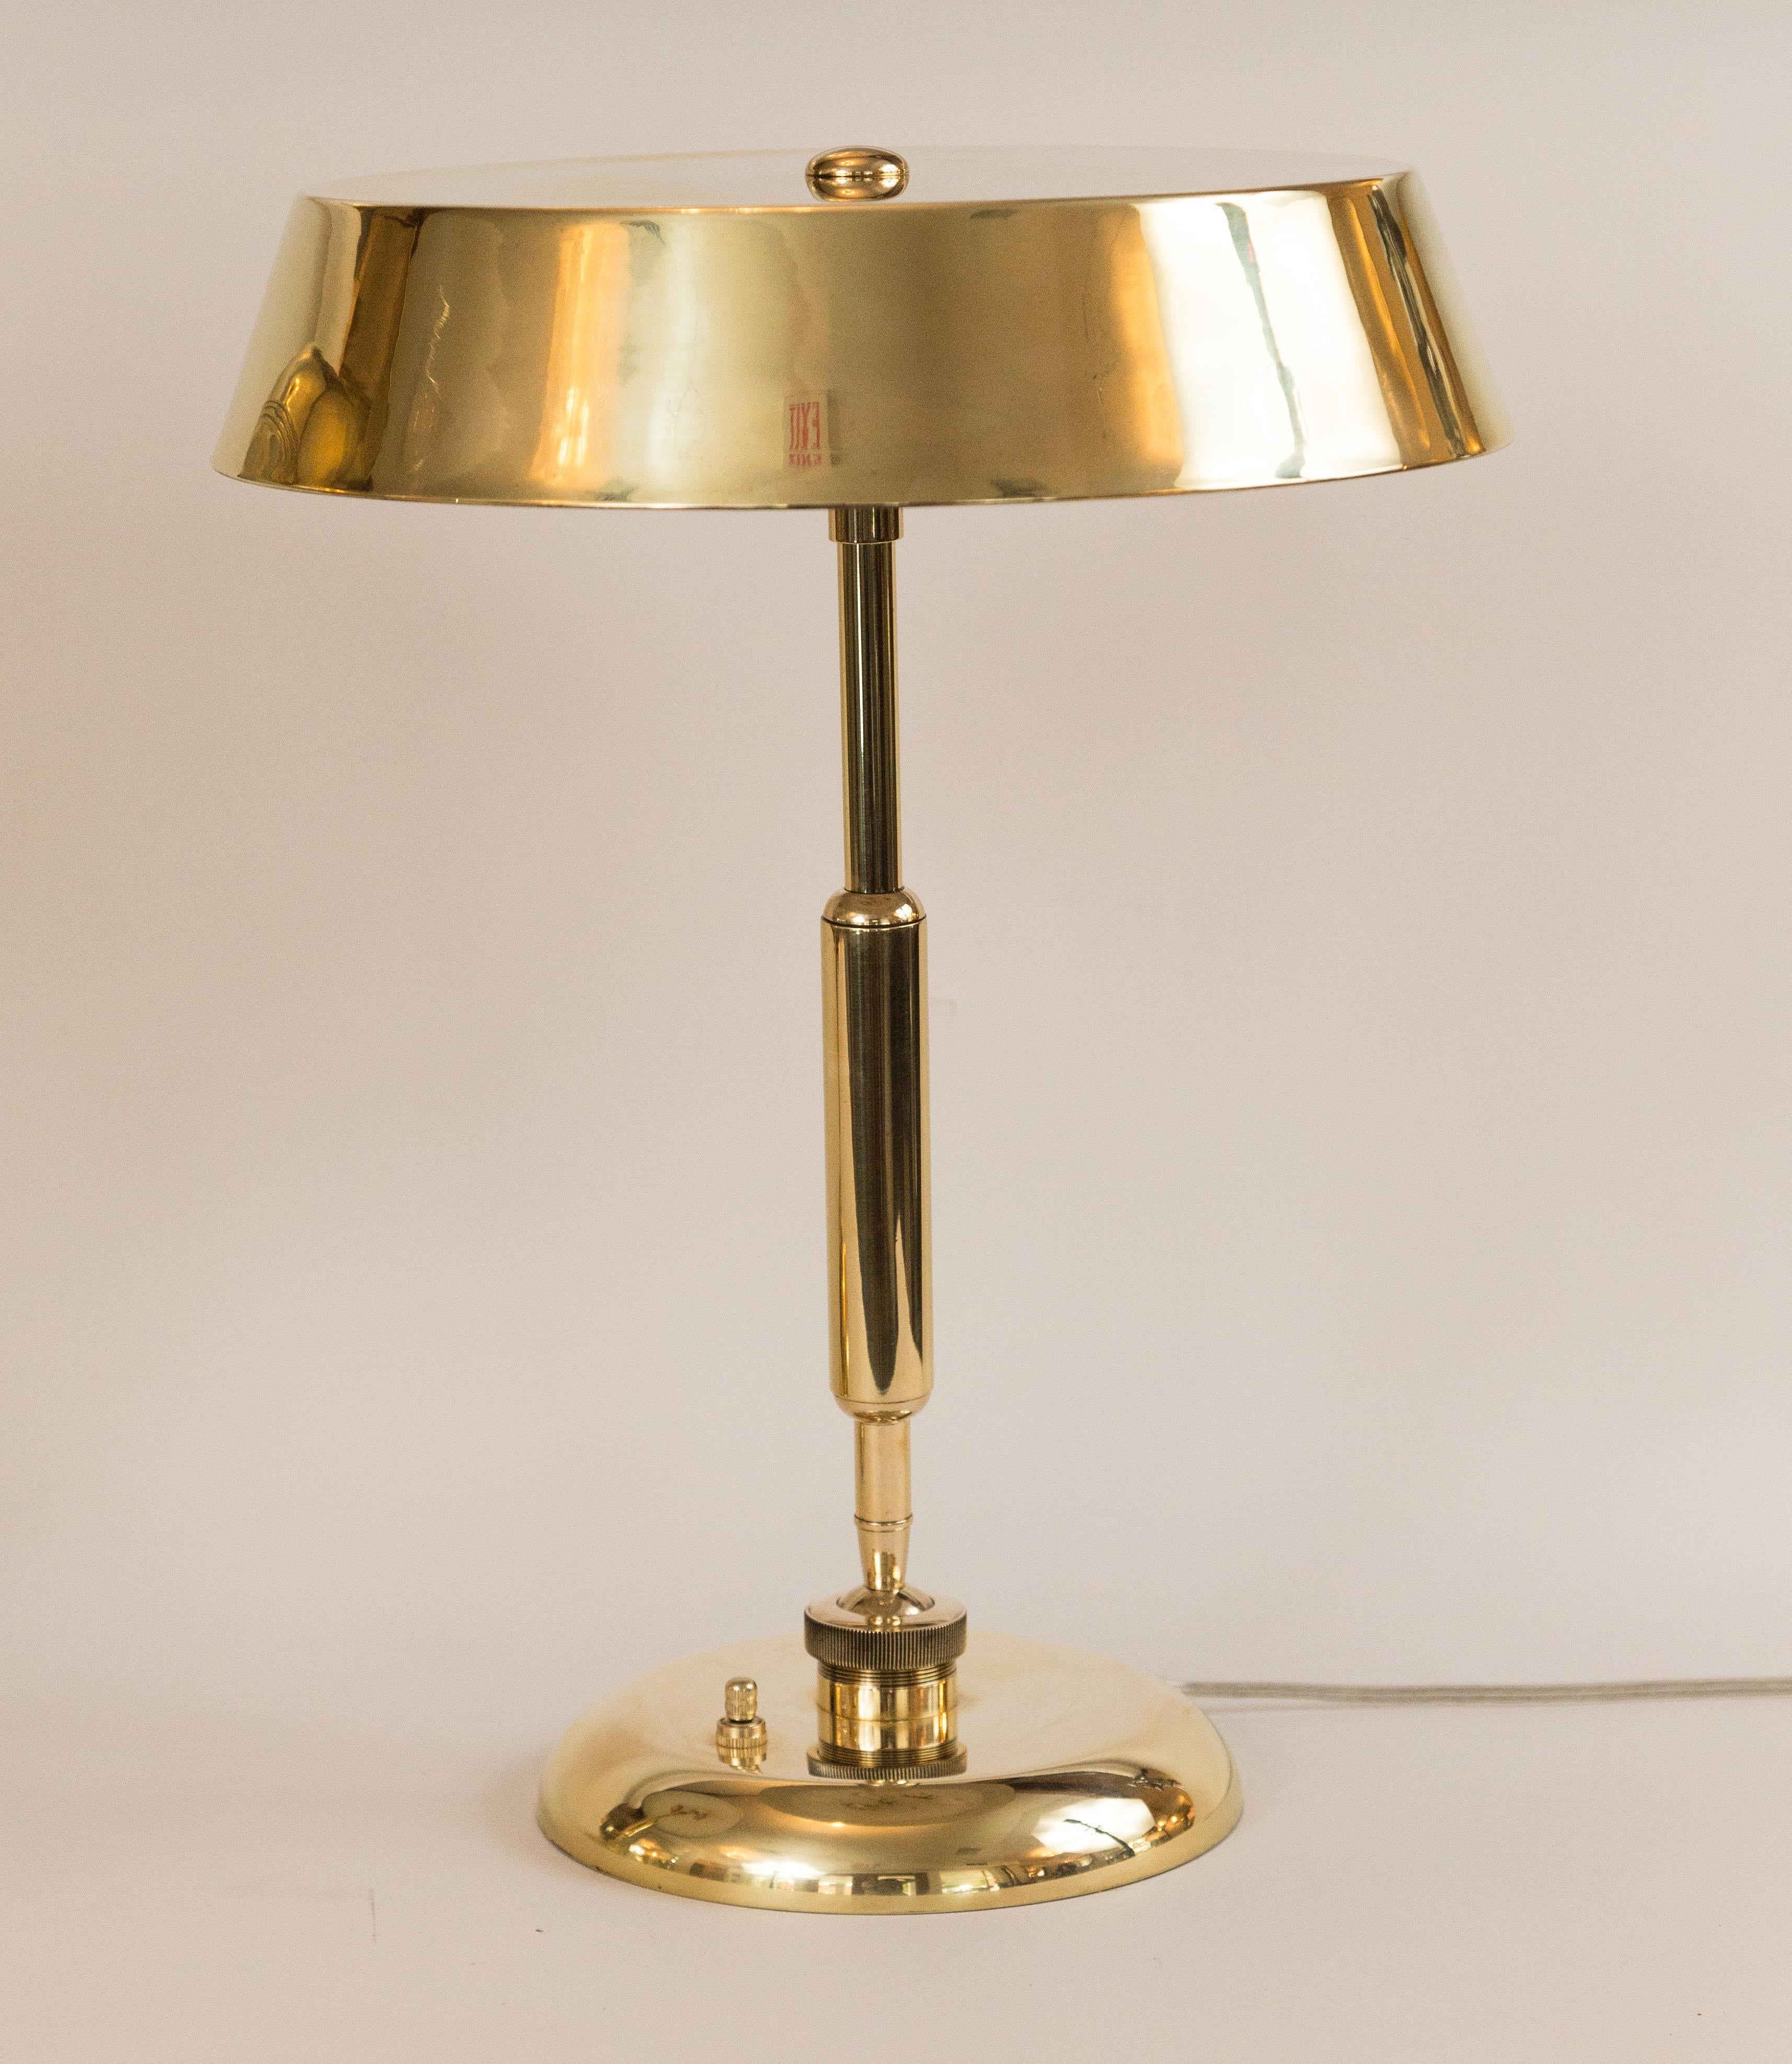 Elegant Brass Table Lamp by Oscar Torlasco for the manufacturer Lumi.

Note ingenious pivoting arm and shade mechanism.  Made from solid unlacquered brass and professionally machine polished. This is a living finish.
Origin: Milano, Italy
Dating: